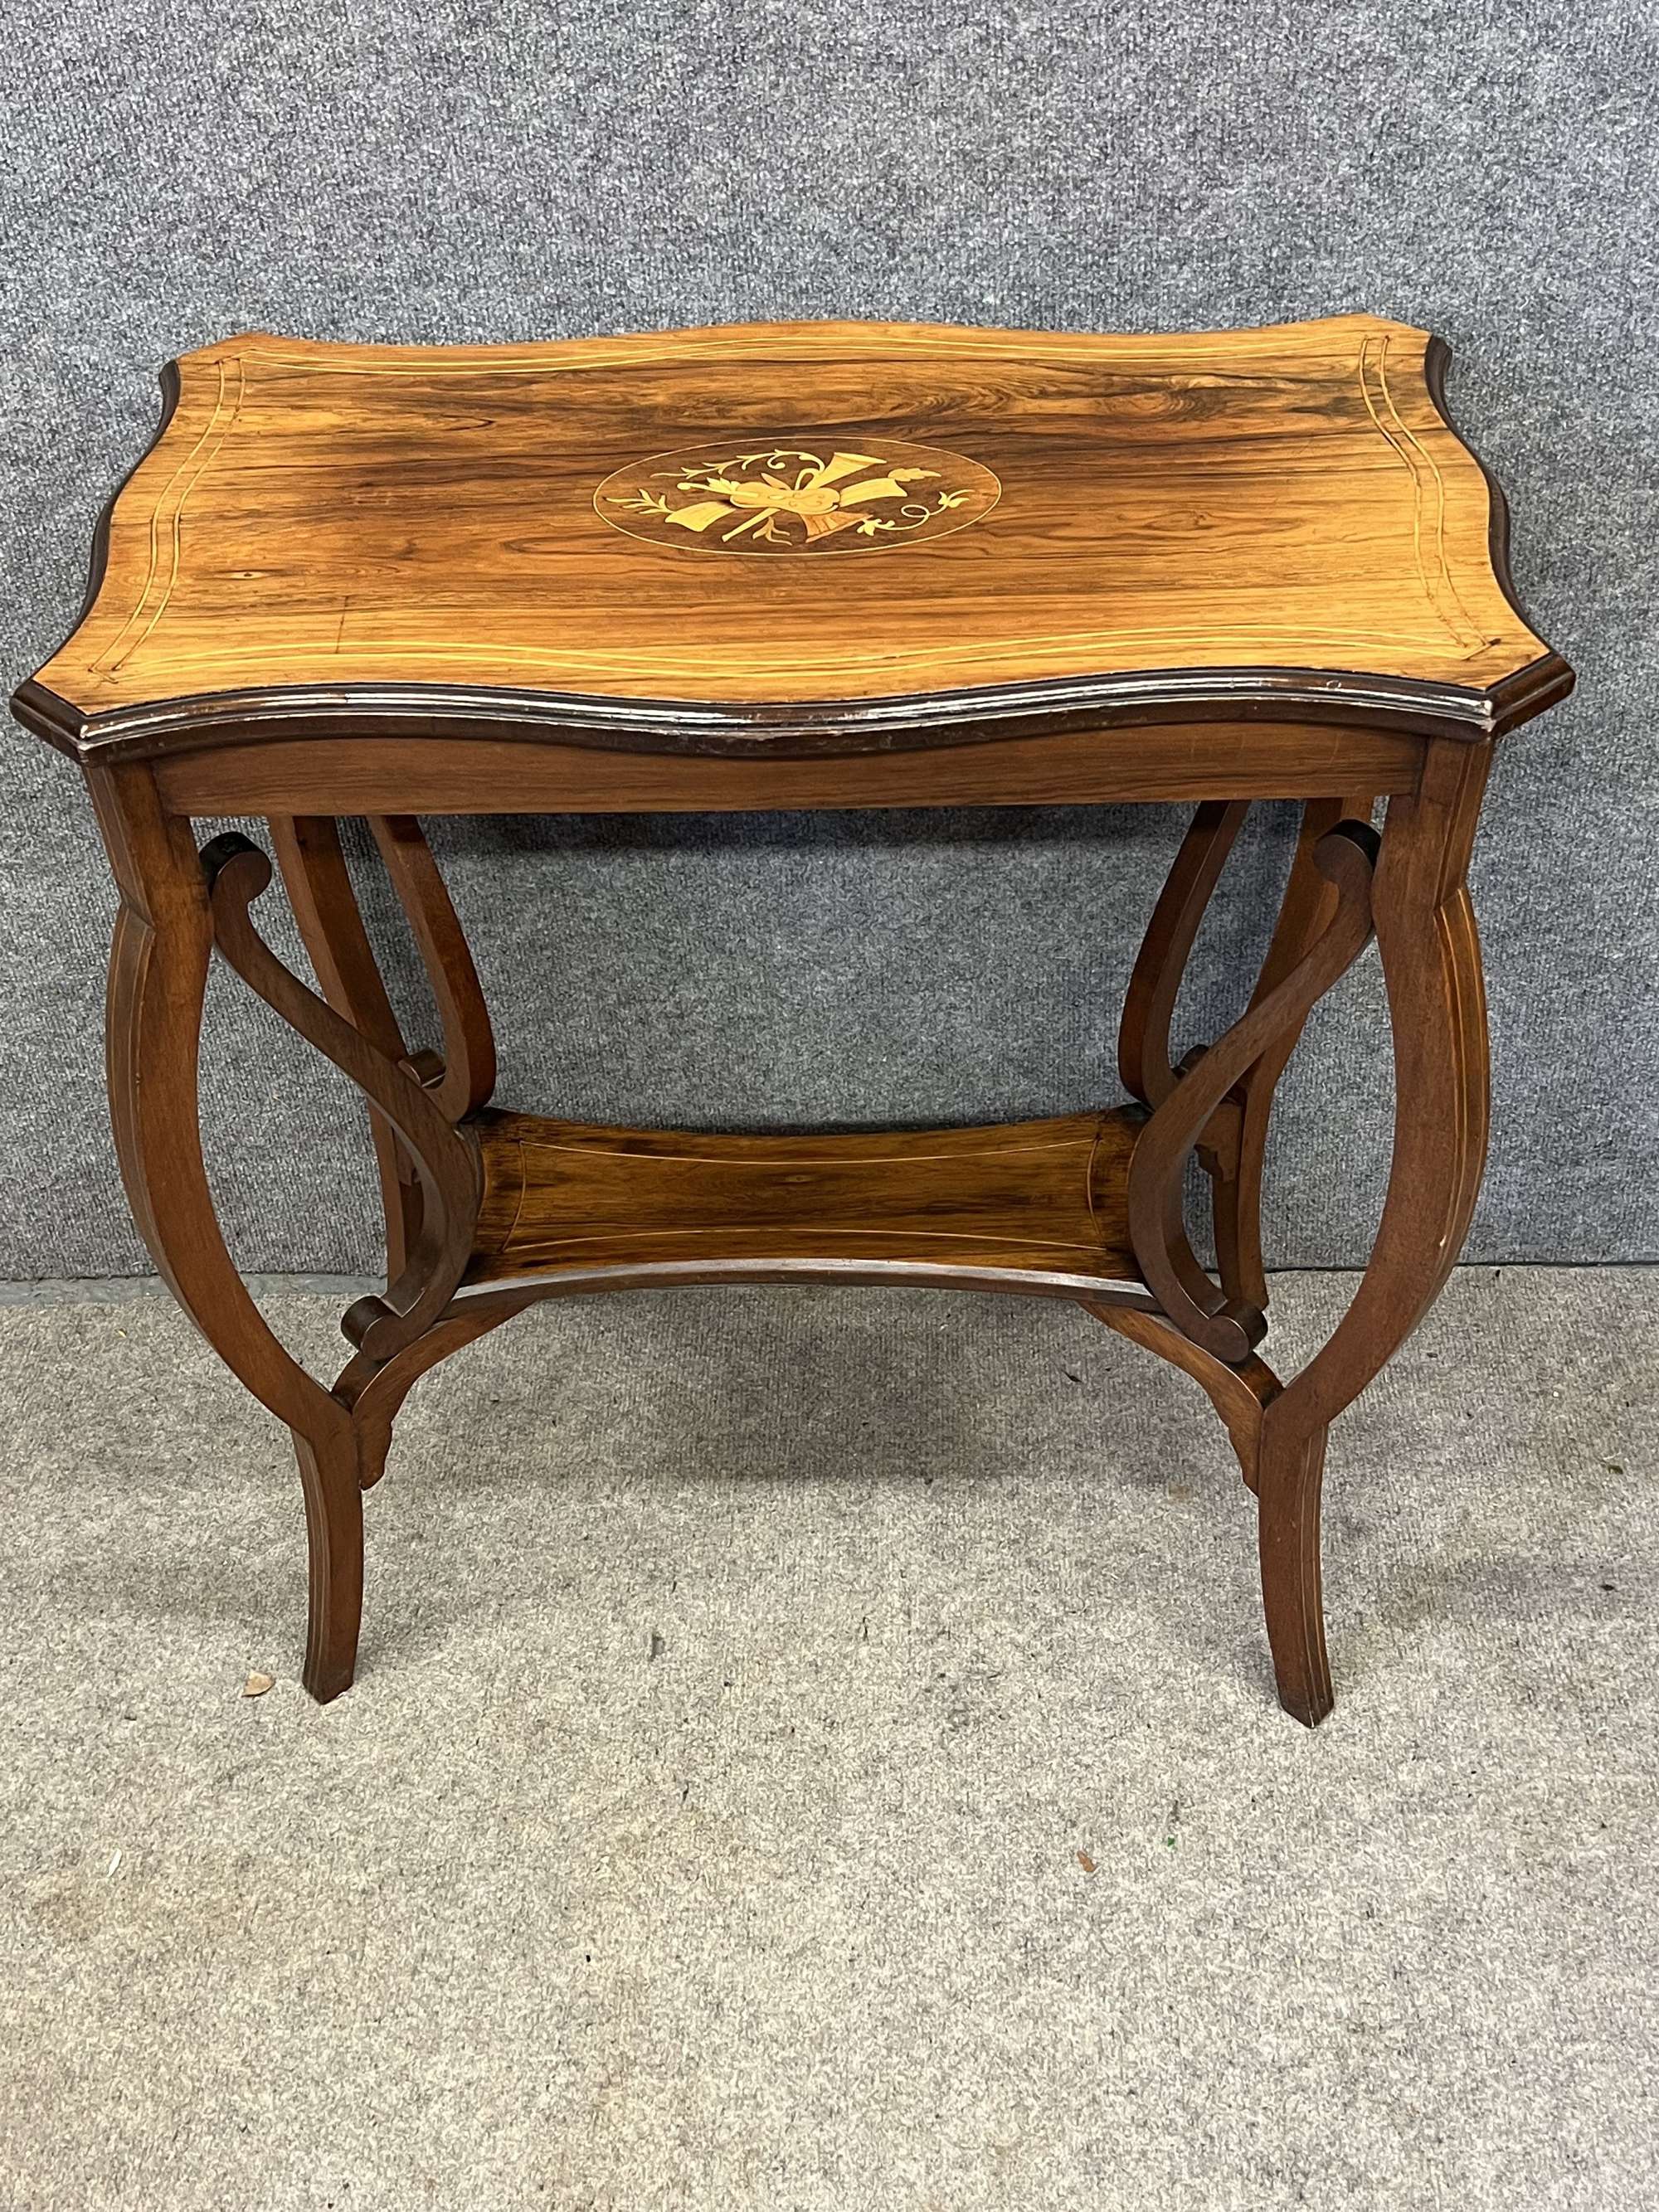 Edwardian Rosewood & Inlaid Occasional Table